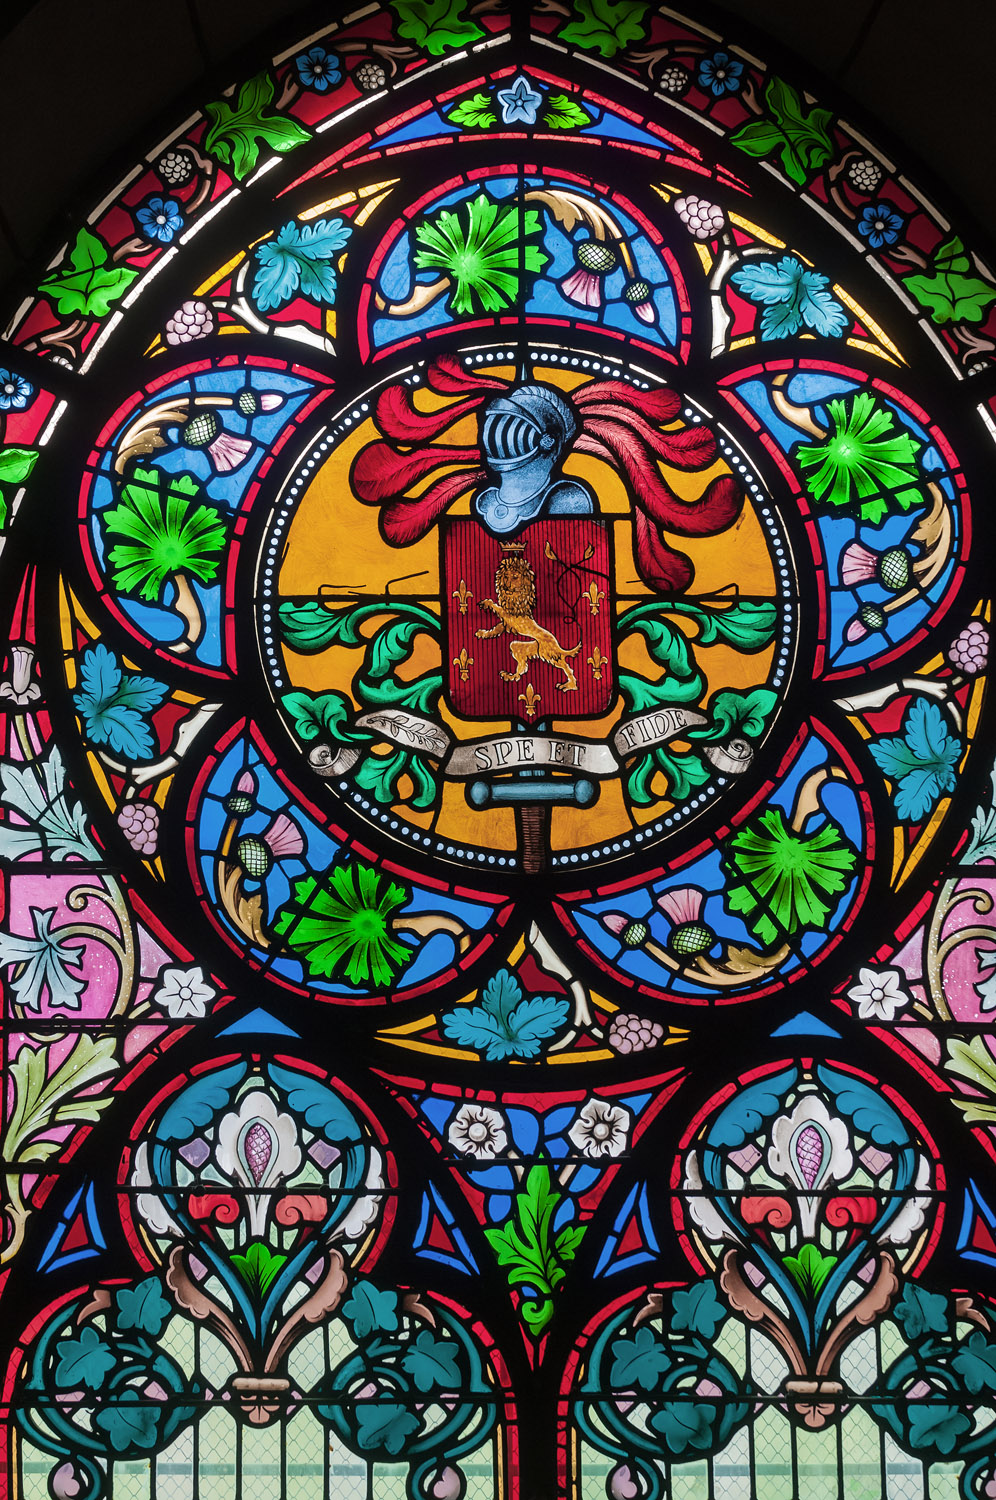 stained-glass window in the Valmagne Abbey, France